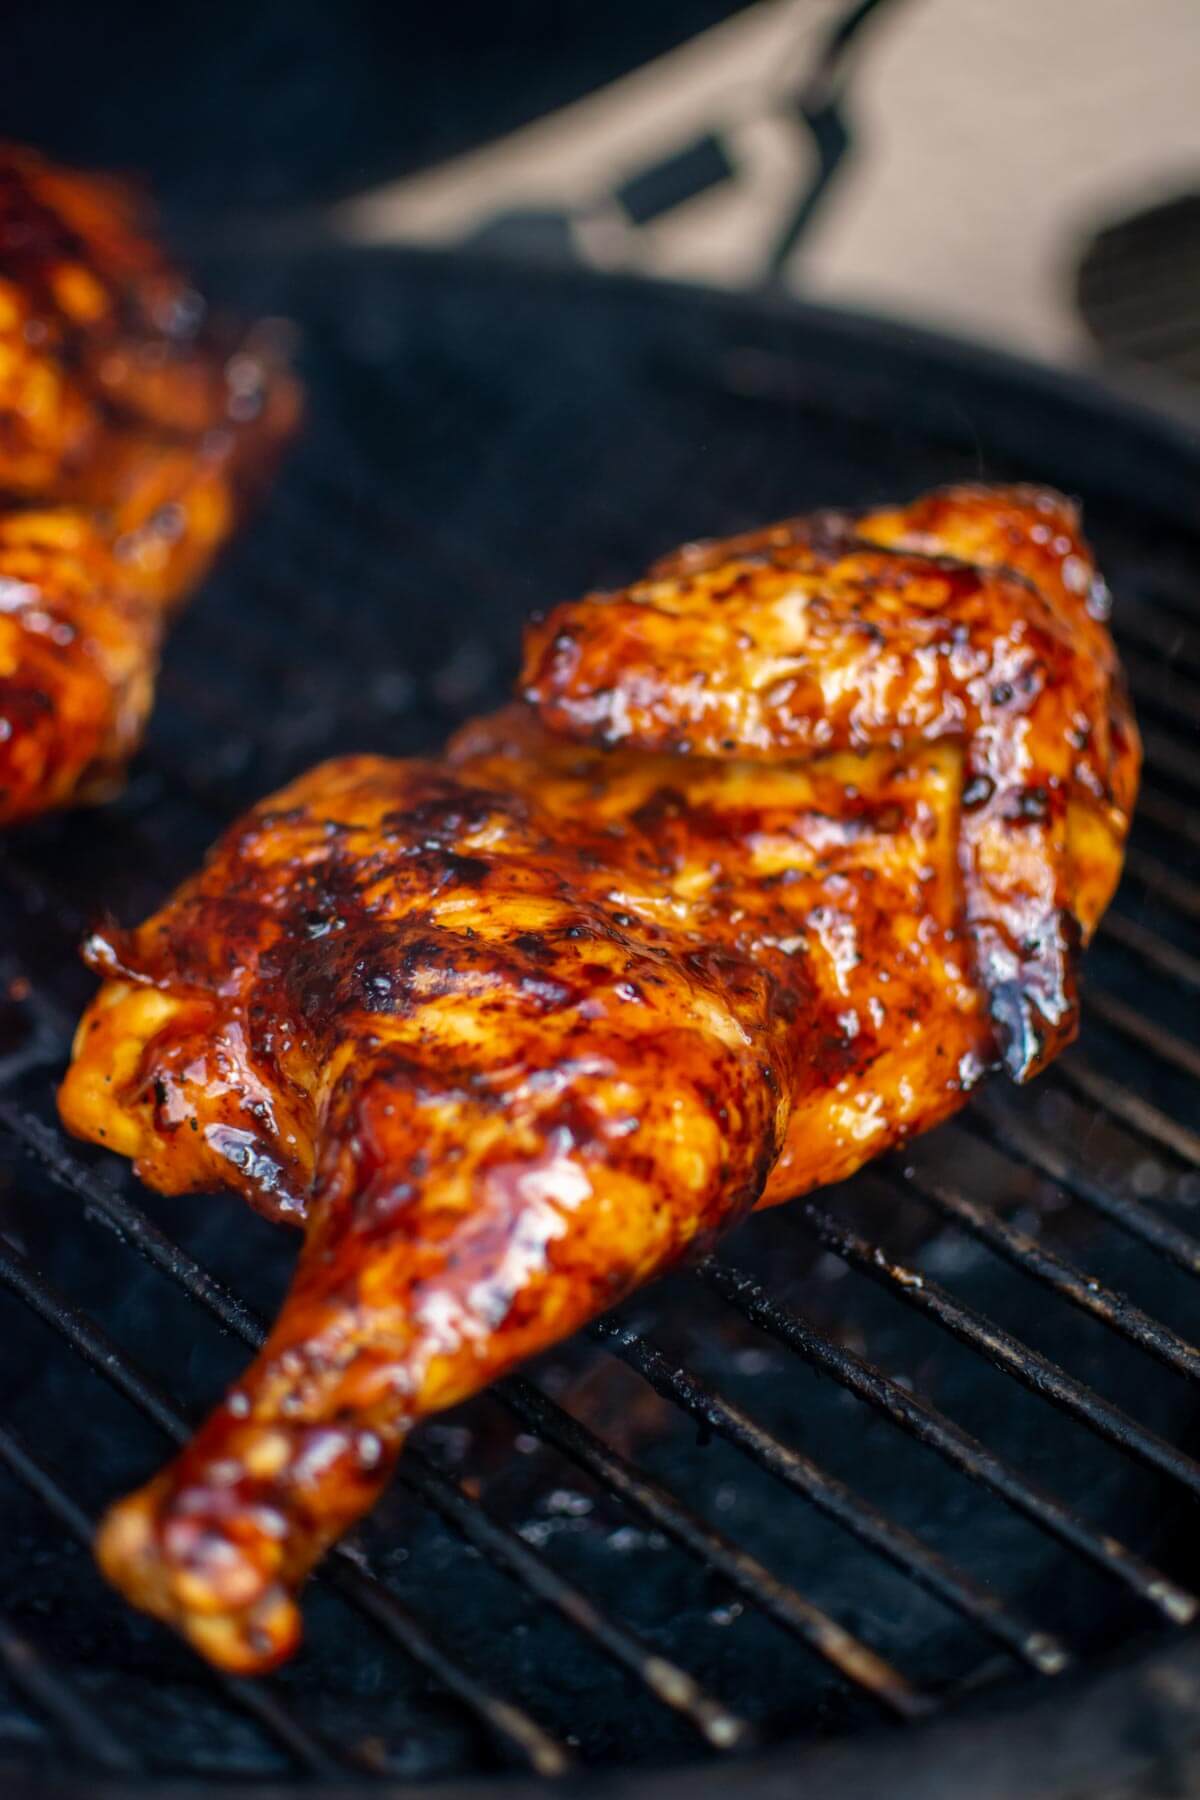 grilled half chicken on the grill covered in a sweet and tangy teriyaki BBQ sauce.